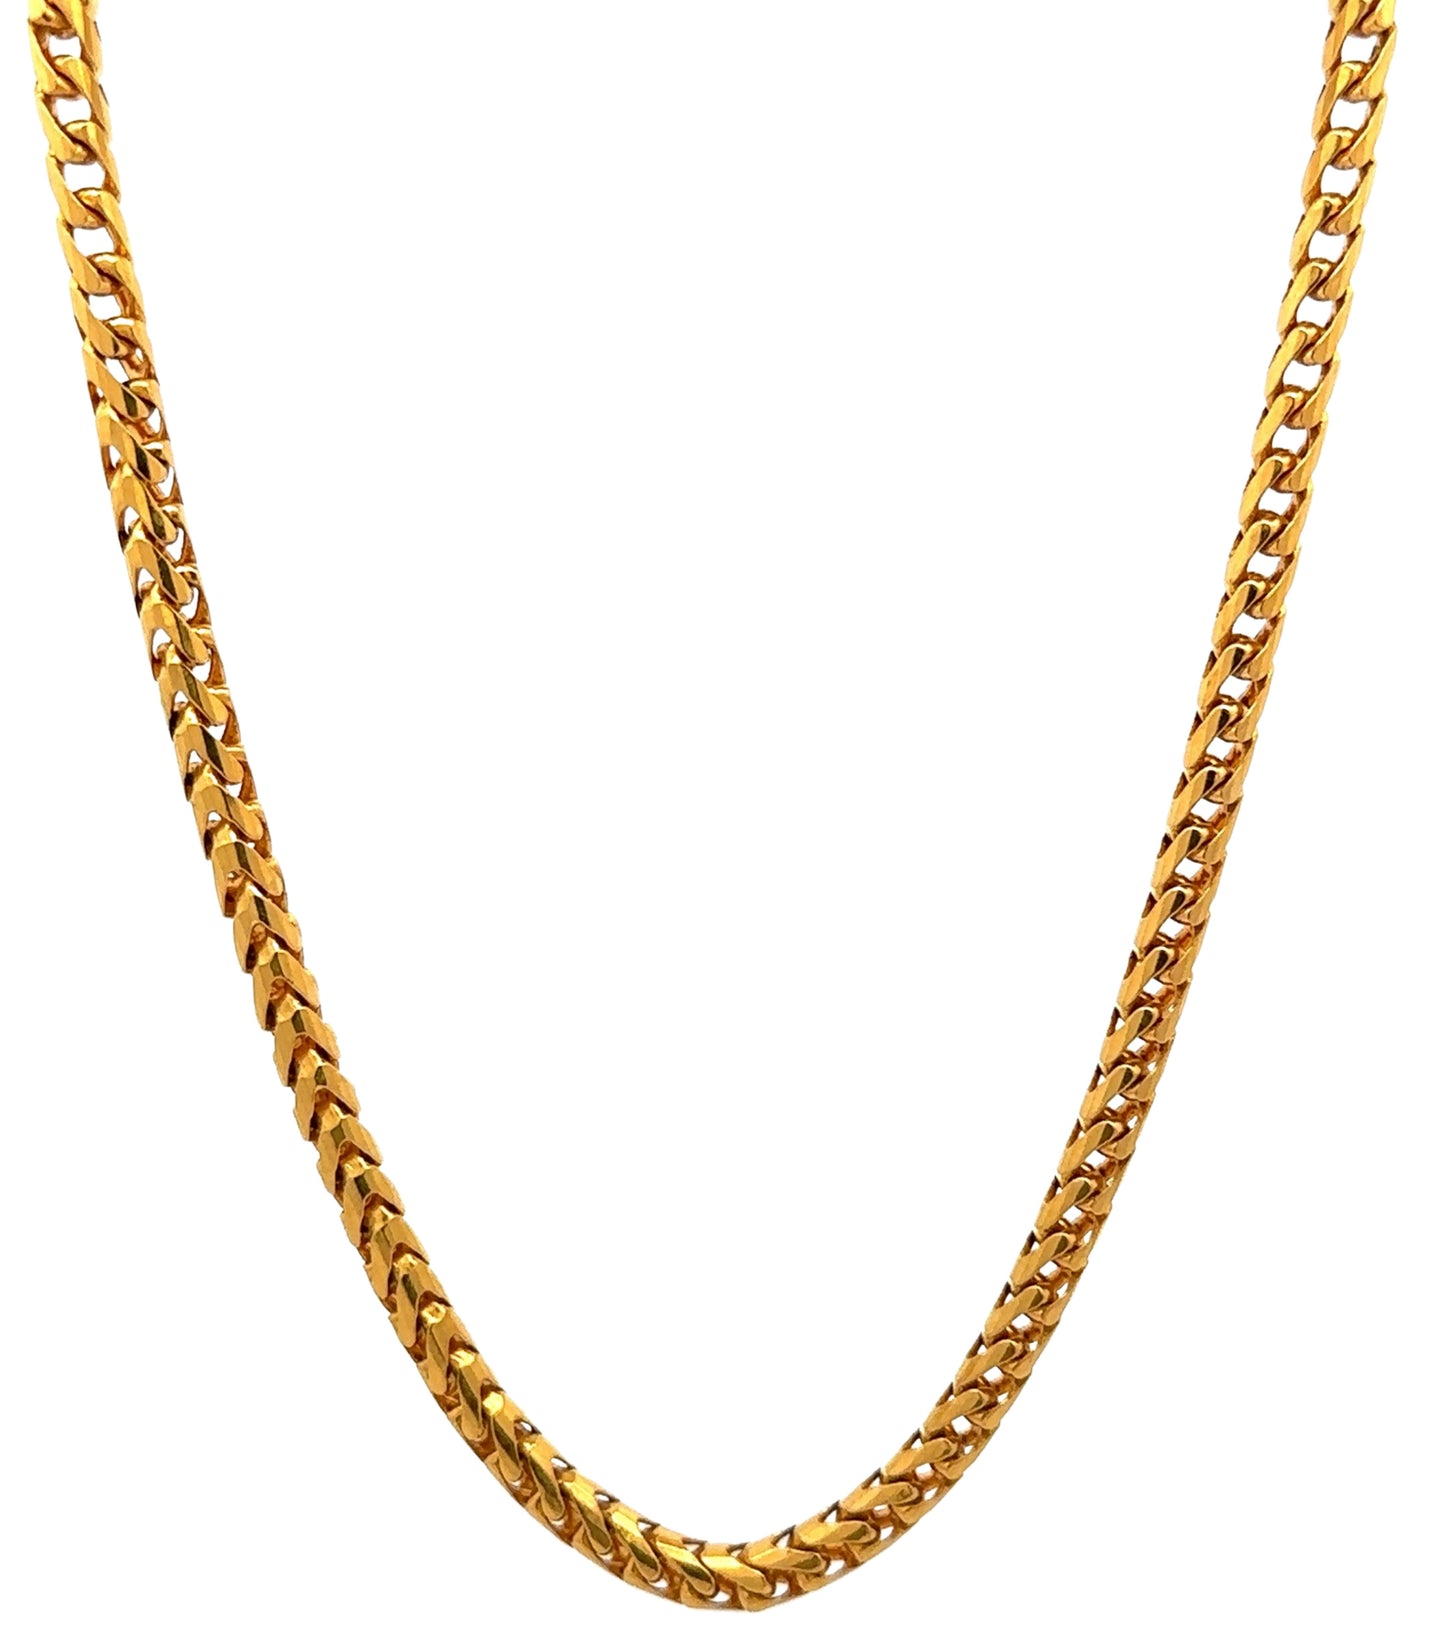 21k yellow gold hanging round-style franco chain